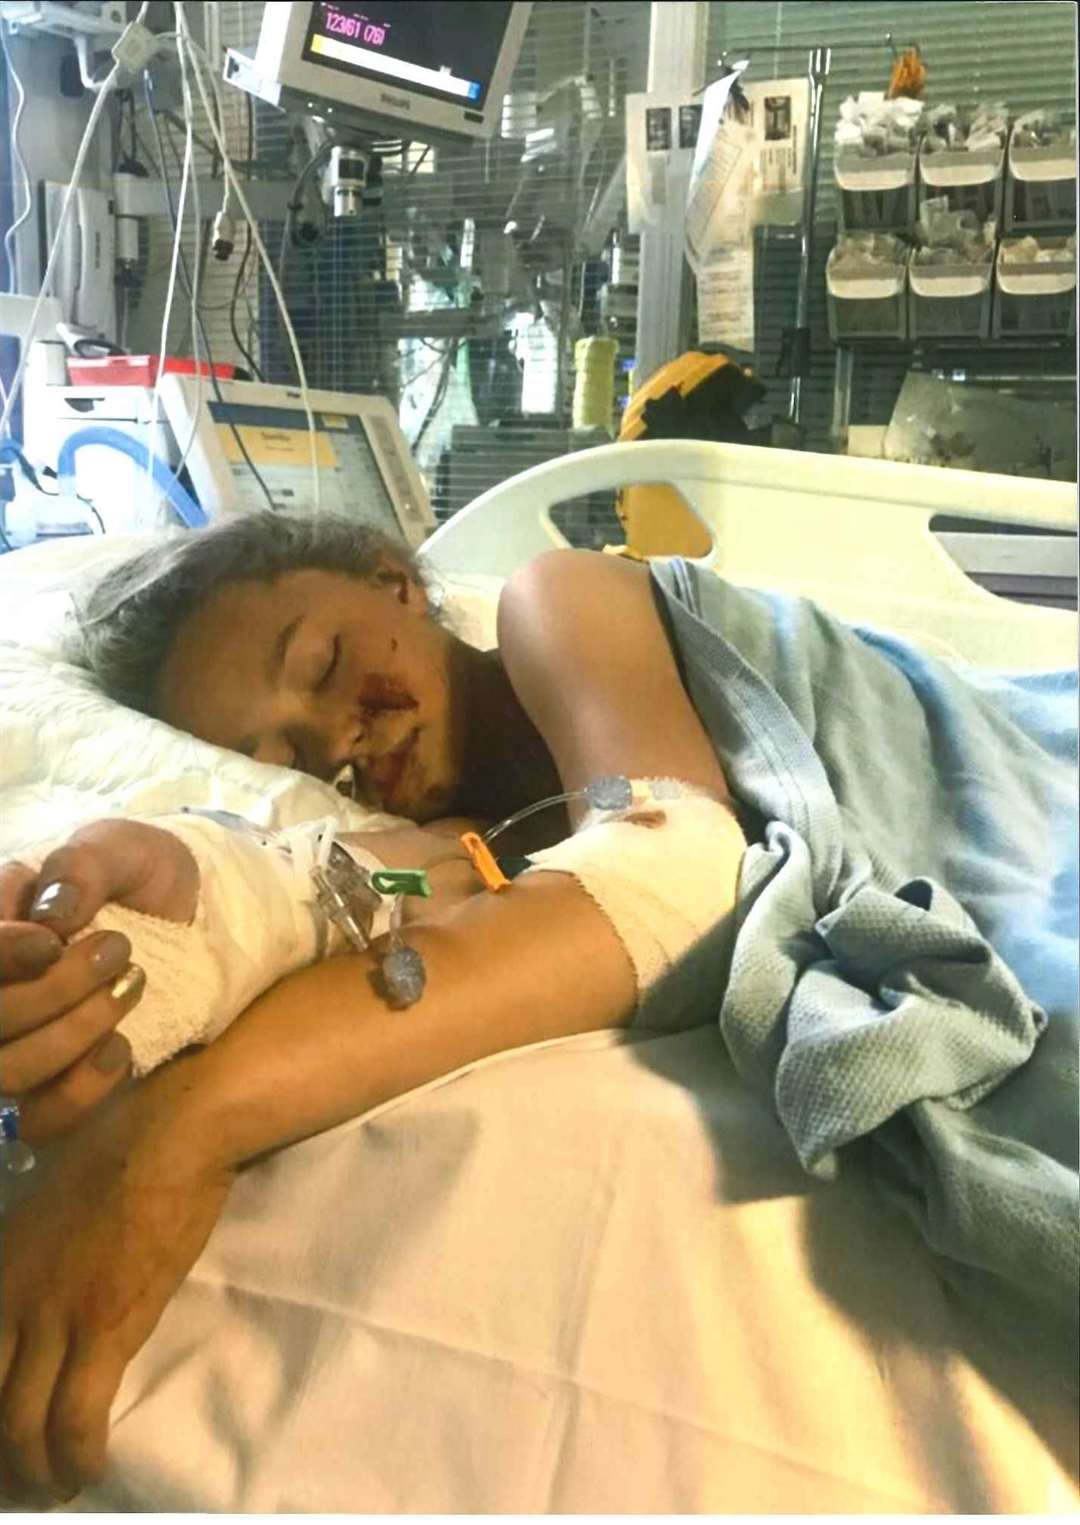 Gracie Maddox at King's hospital on life support following a tragic accident on Fleet Estate, Dartford on June 26, 2017. Picture: Caitlin Webb, Local democracy reporter (4147229)